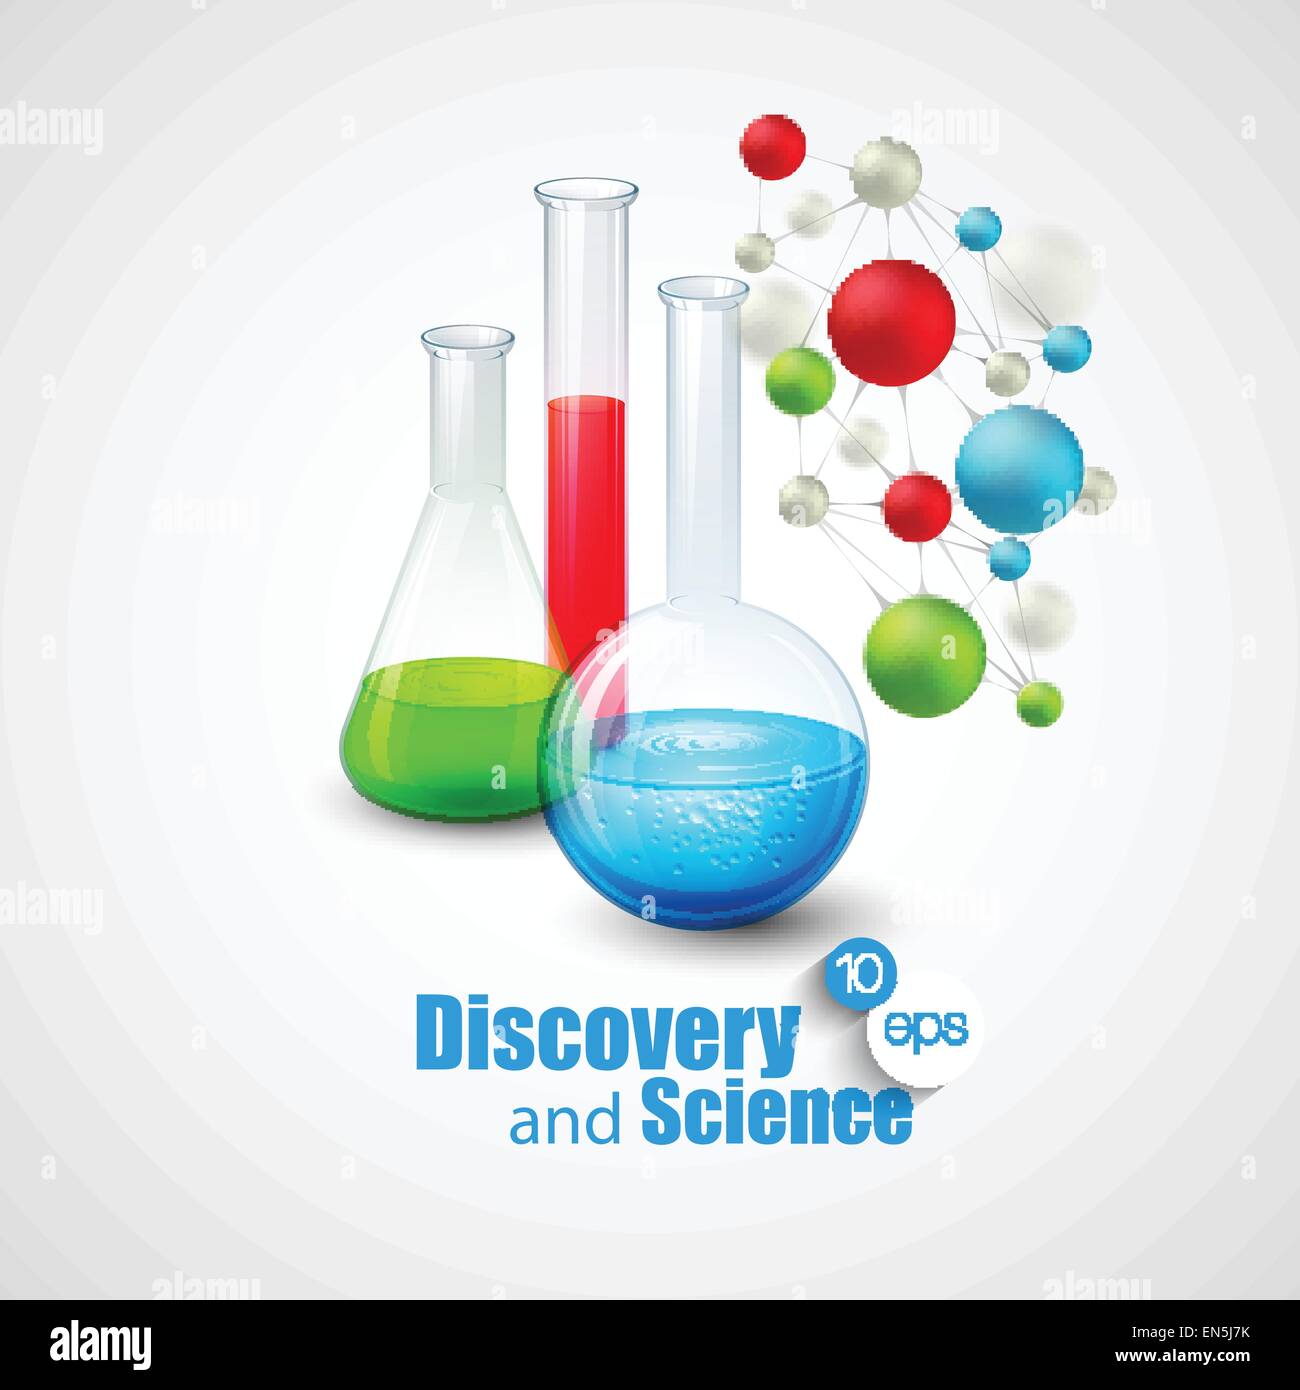 Chemical Science and discovery. Vector illustration. Molecule and flasks Stock Vector